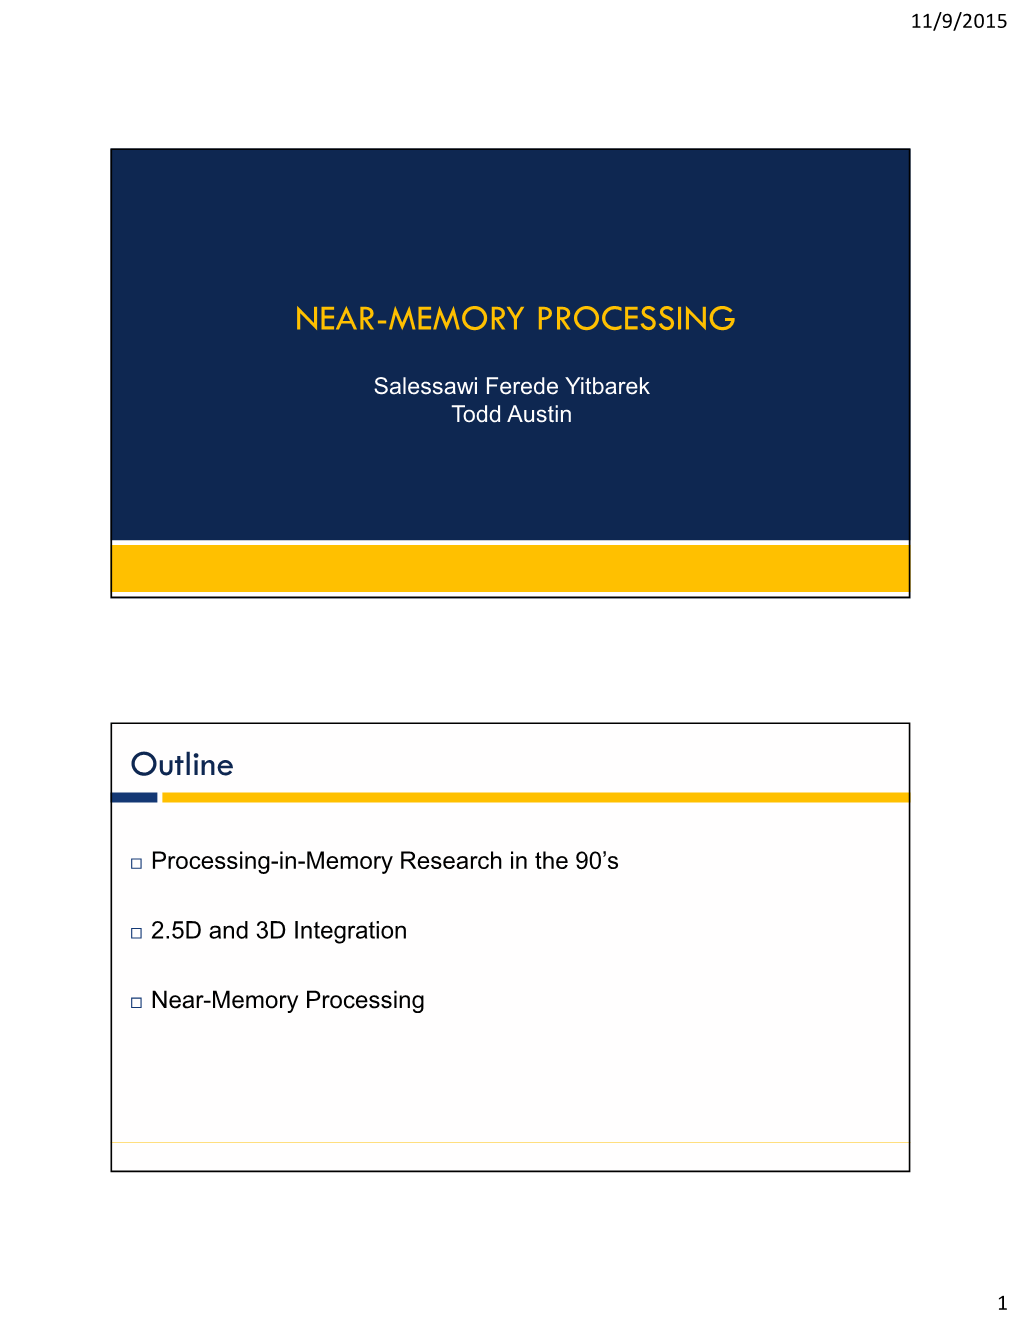 NEAR-MEMORY PROCESSING Outline